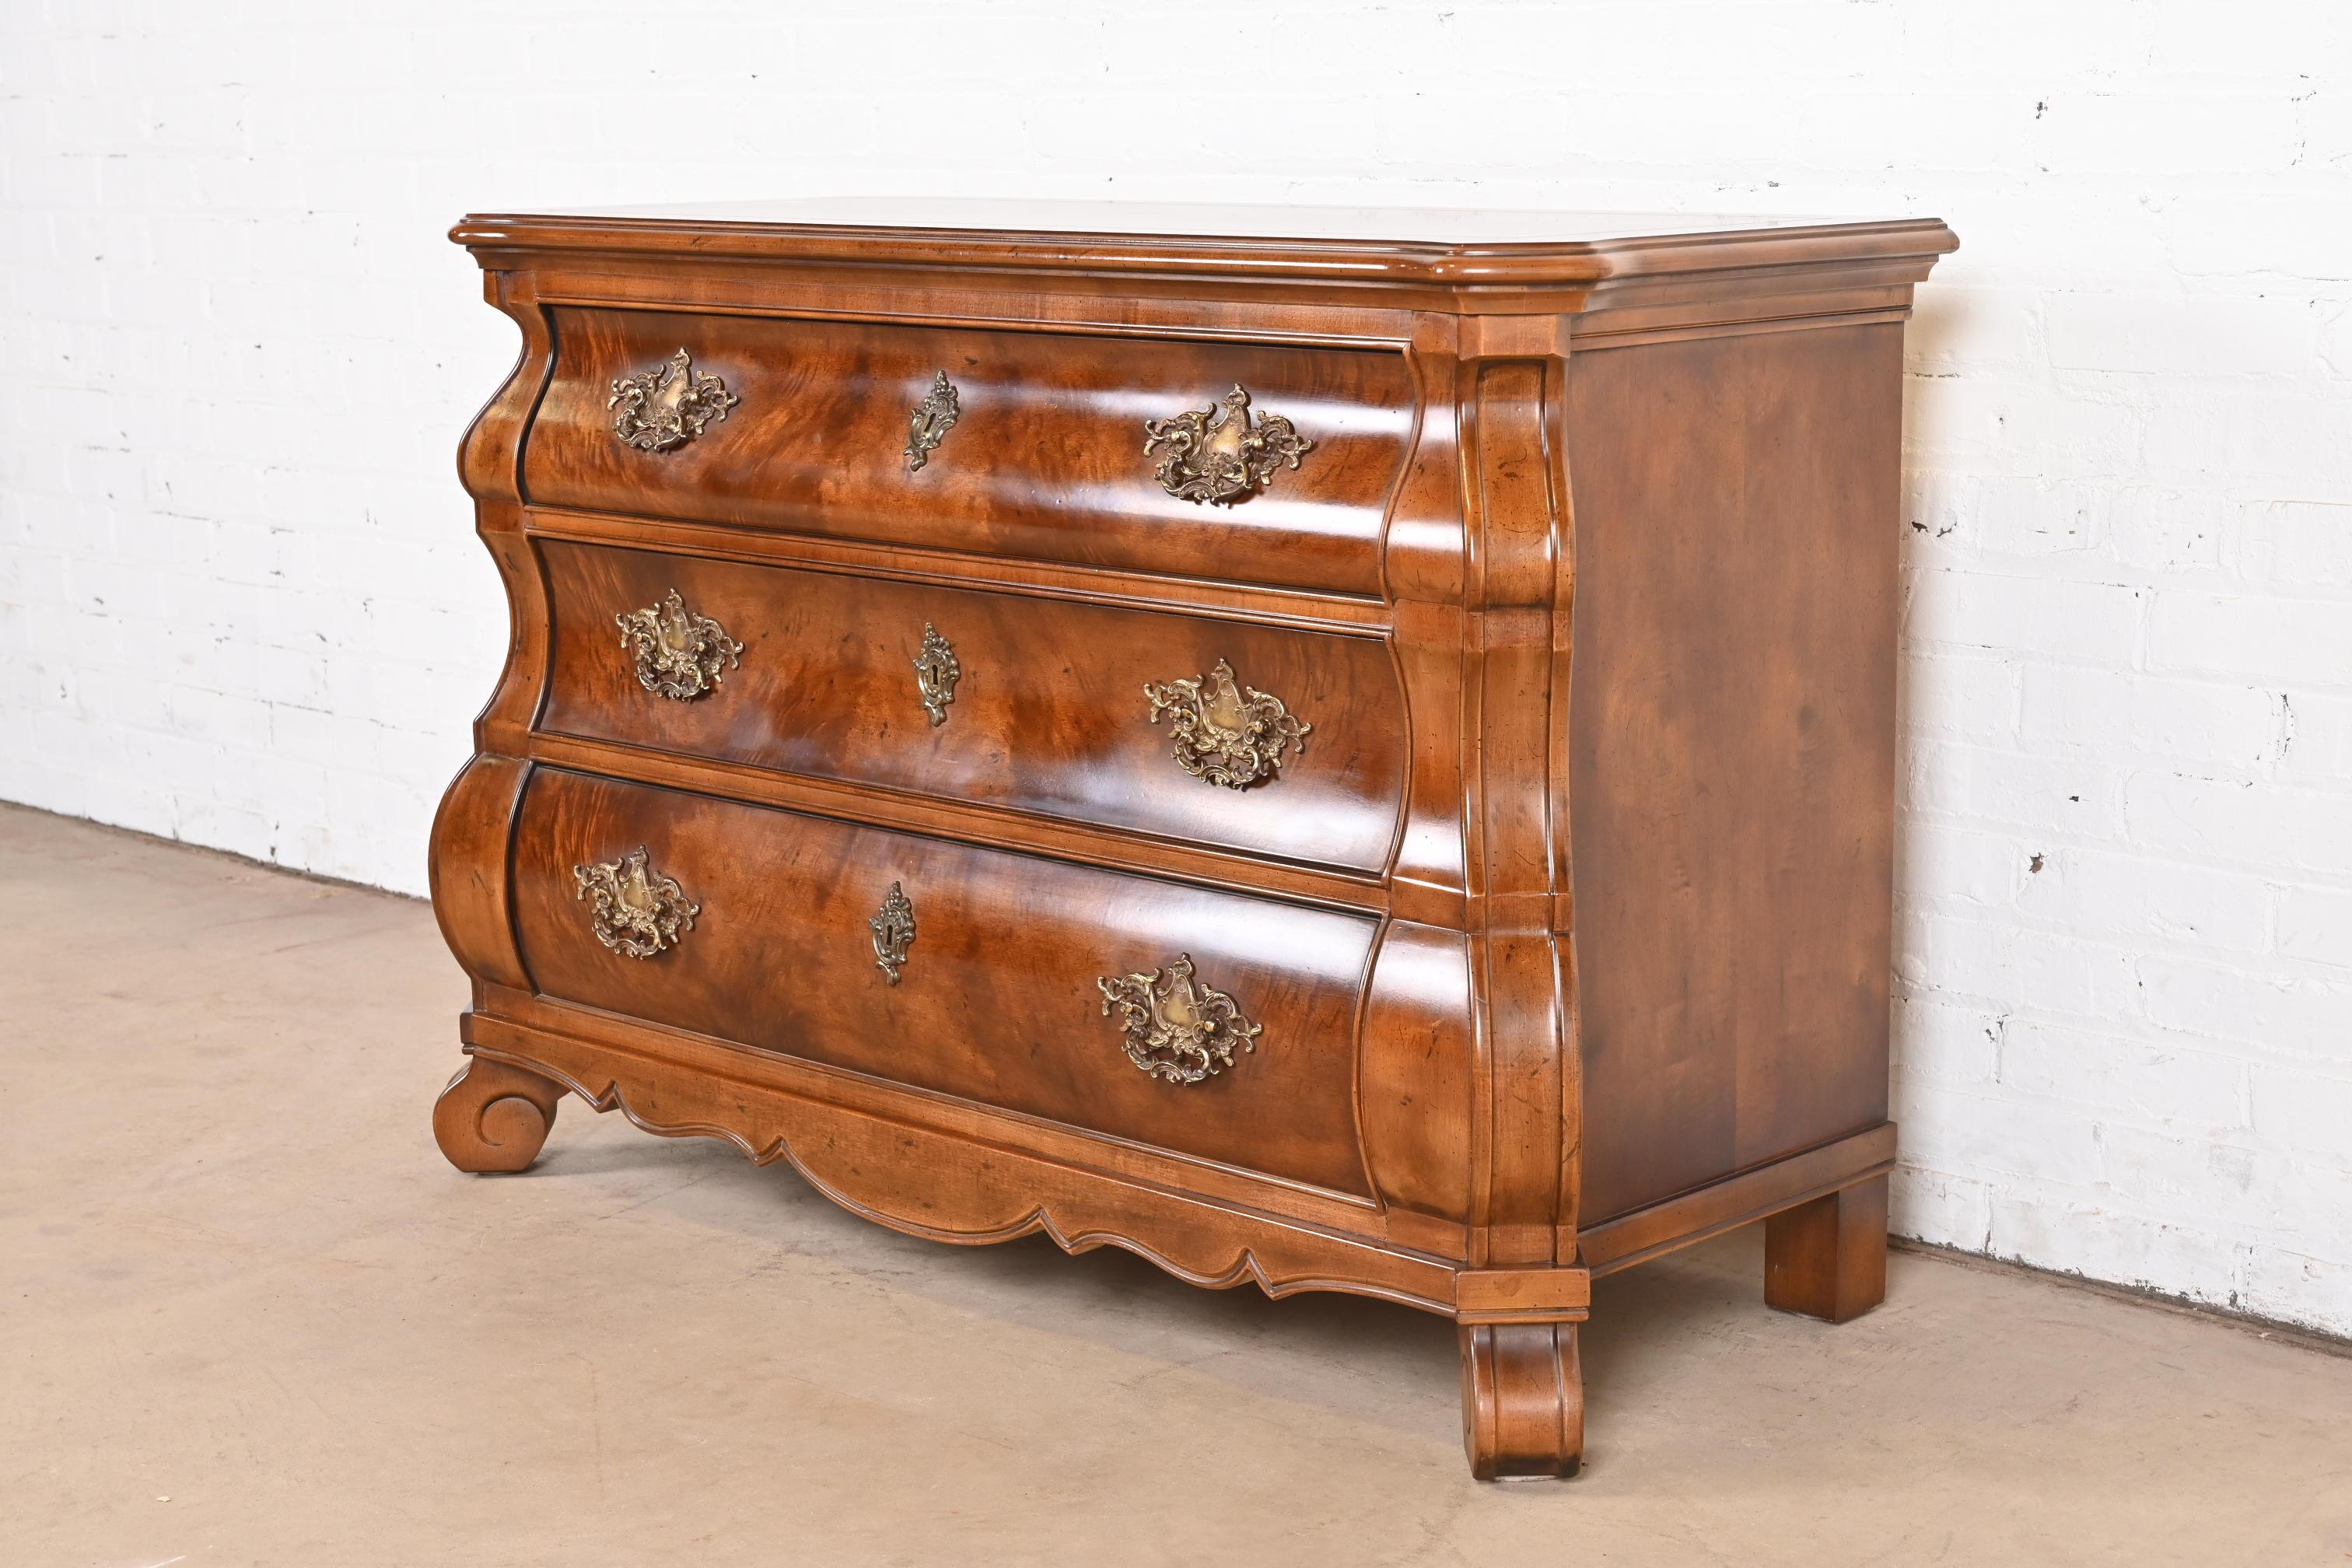 Henredon Italian Baroque Burled Mahogany Bombay Chest or Commode In Good Condition For Sale In South Bend, IN